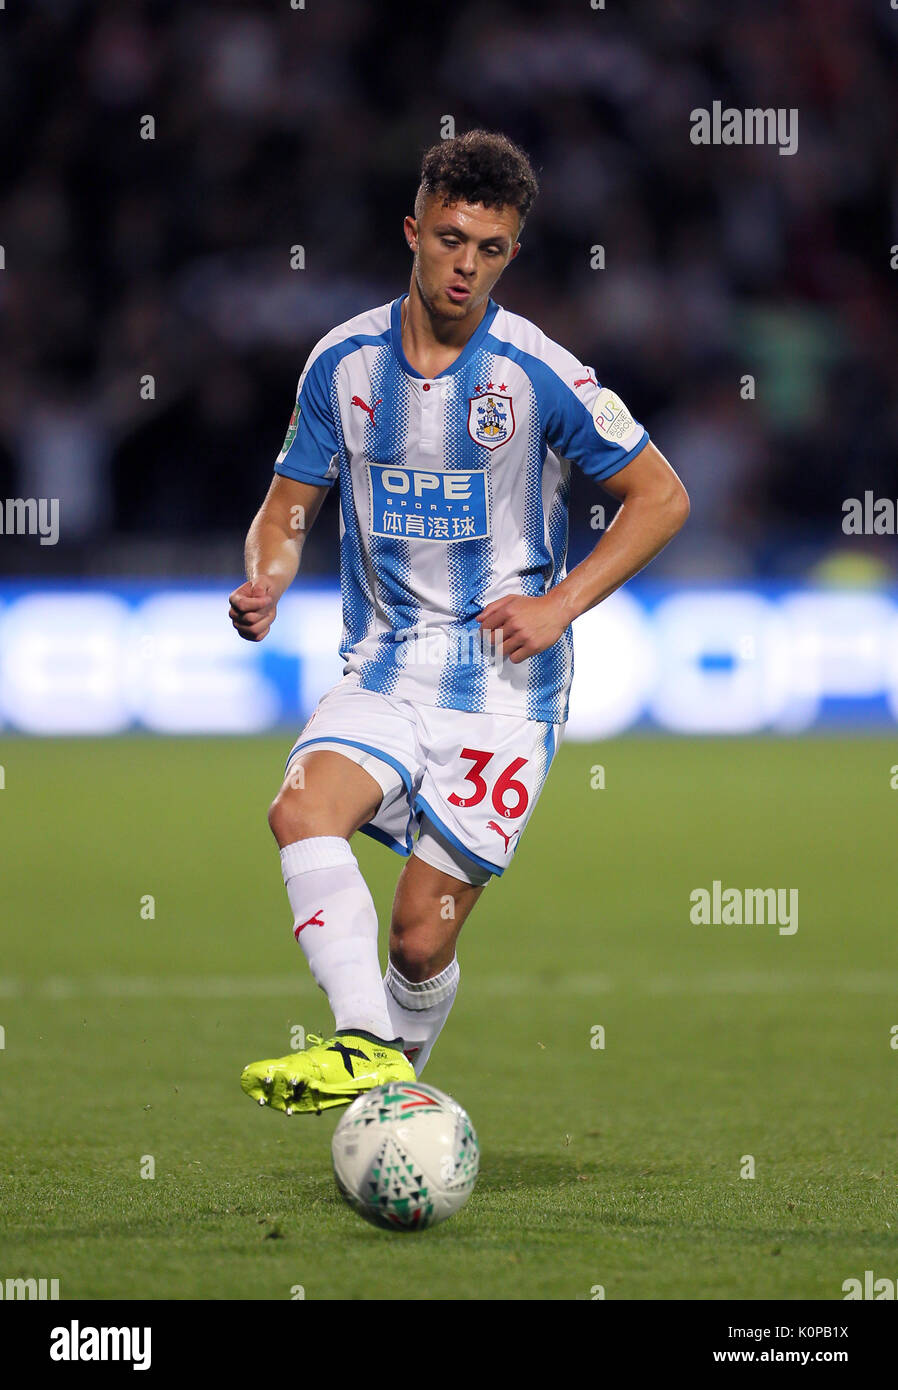 Huddersfield Town's Jordan Williams during the Carabao Cup, Second Round match at the John Smith's Stadium, Huddersfield. PRESS ASSOCIATION Photo. Picture date: Wednesday August 23, 2017. See PA story SOCCER Huddersfield. Photo credit should read: Richard Sellers/PA Wire. RESTRICTIONS: No use with unauthorised audio, video, data, fixture lists, club/league logos or 'live' services. Online in-match use limited to 75 images, no video emulation. No use in betting, games or single club/league/player publications. Stock Photo